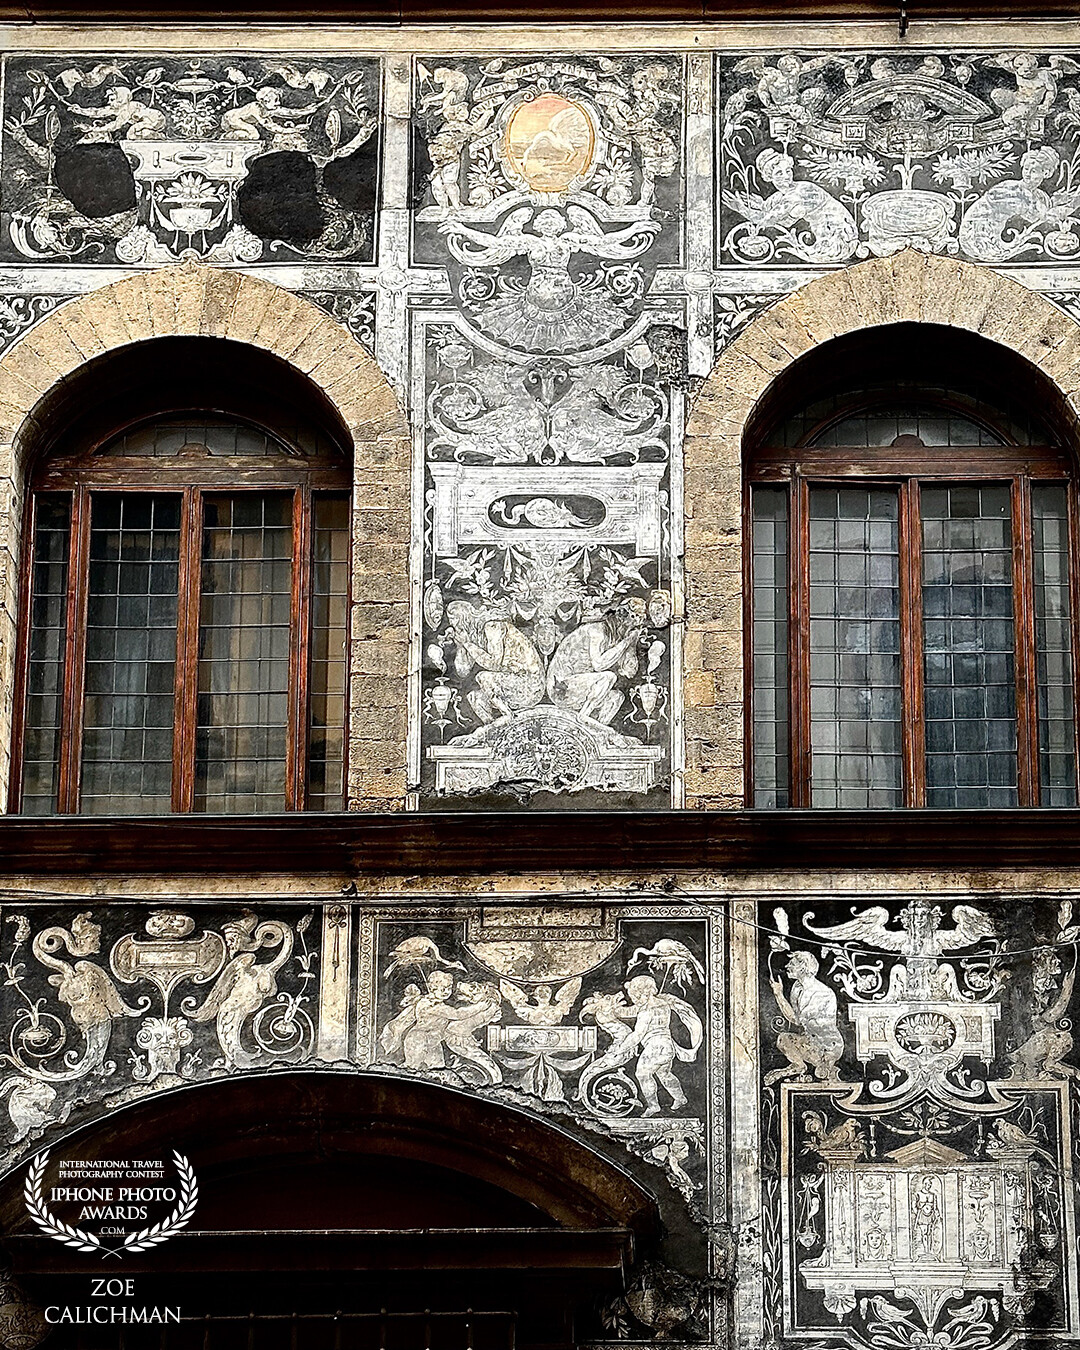 The Palace of Bianca Cappello in Florence Italy; a Renaissance style building notable for its black facade decoration.